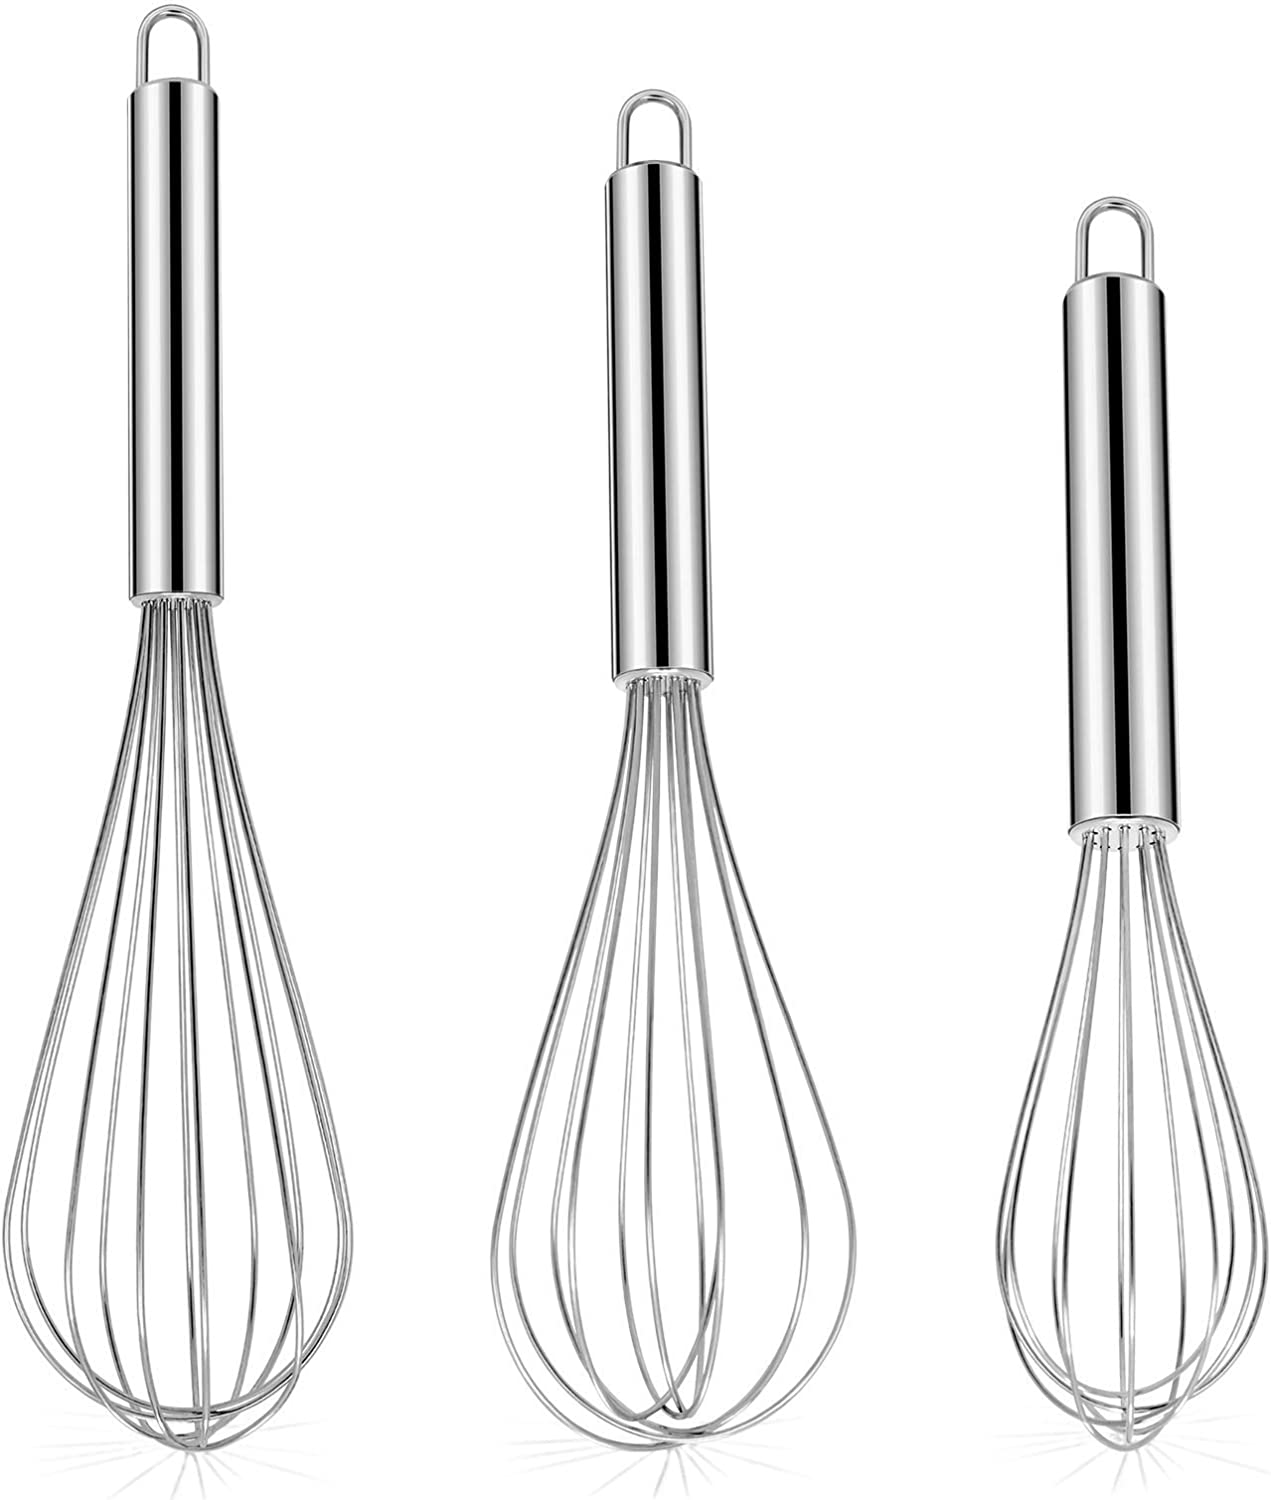 photo of 3 different size whisks